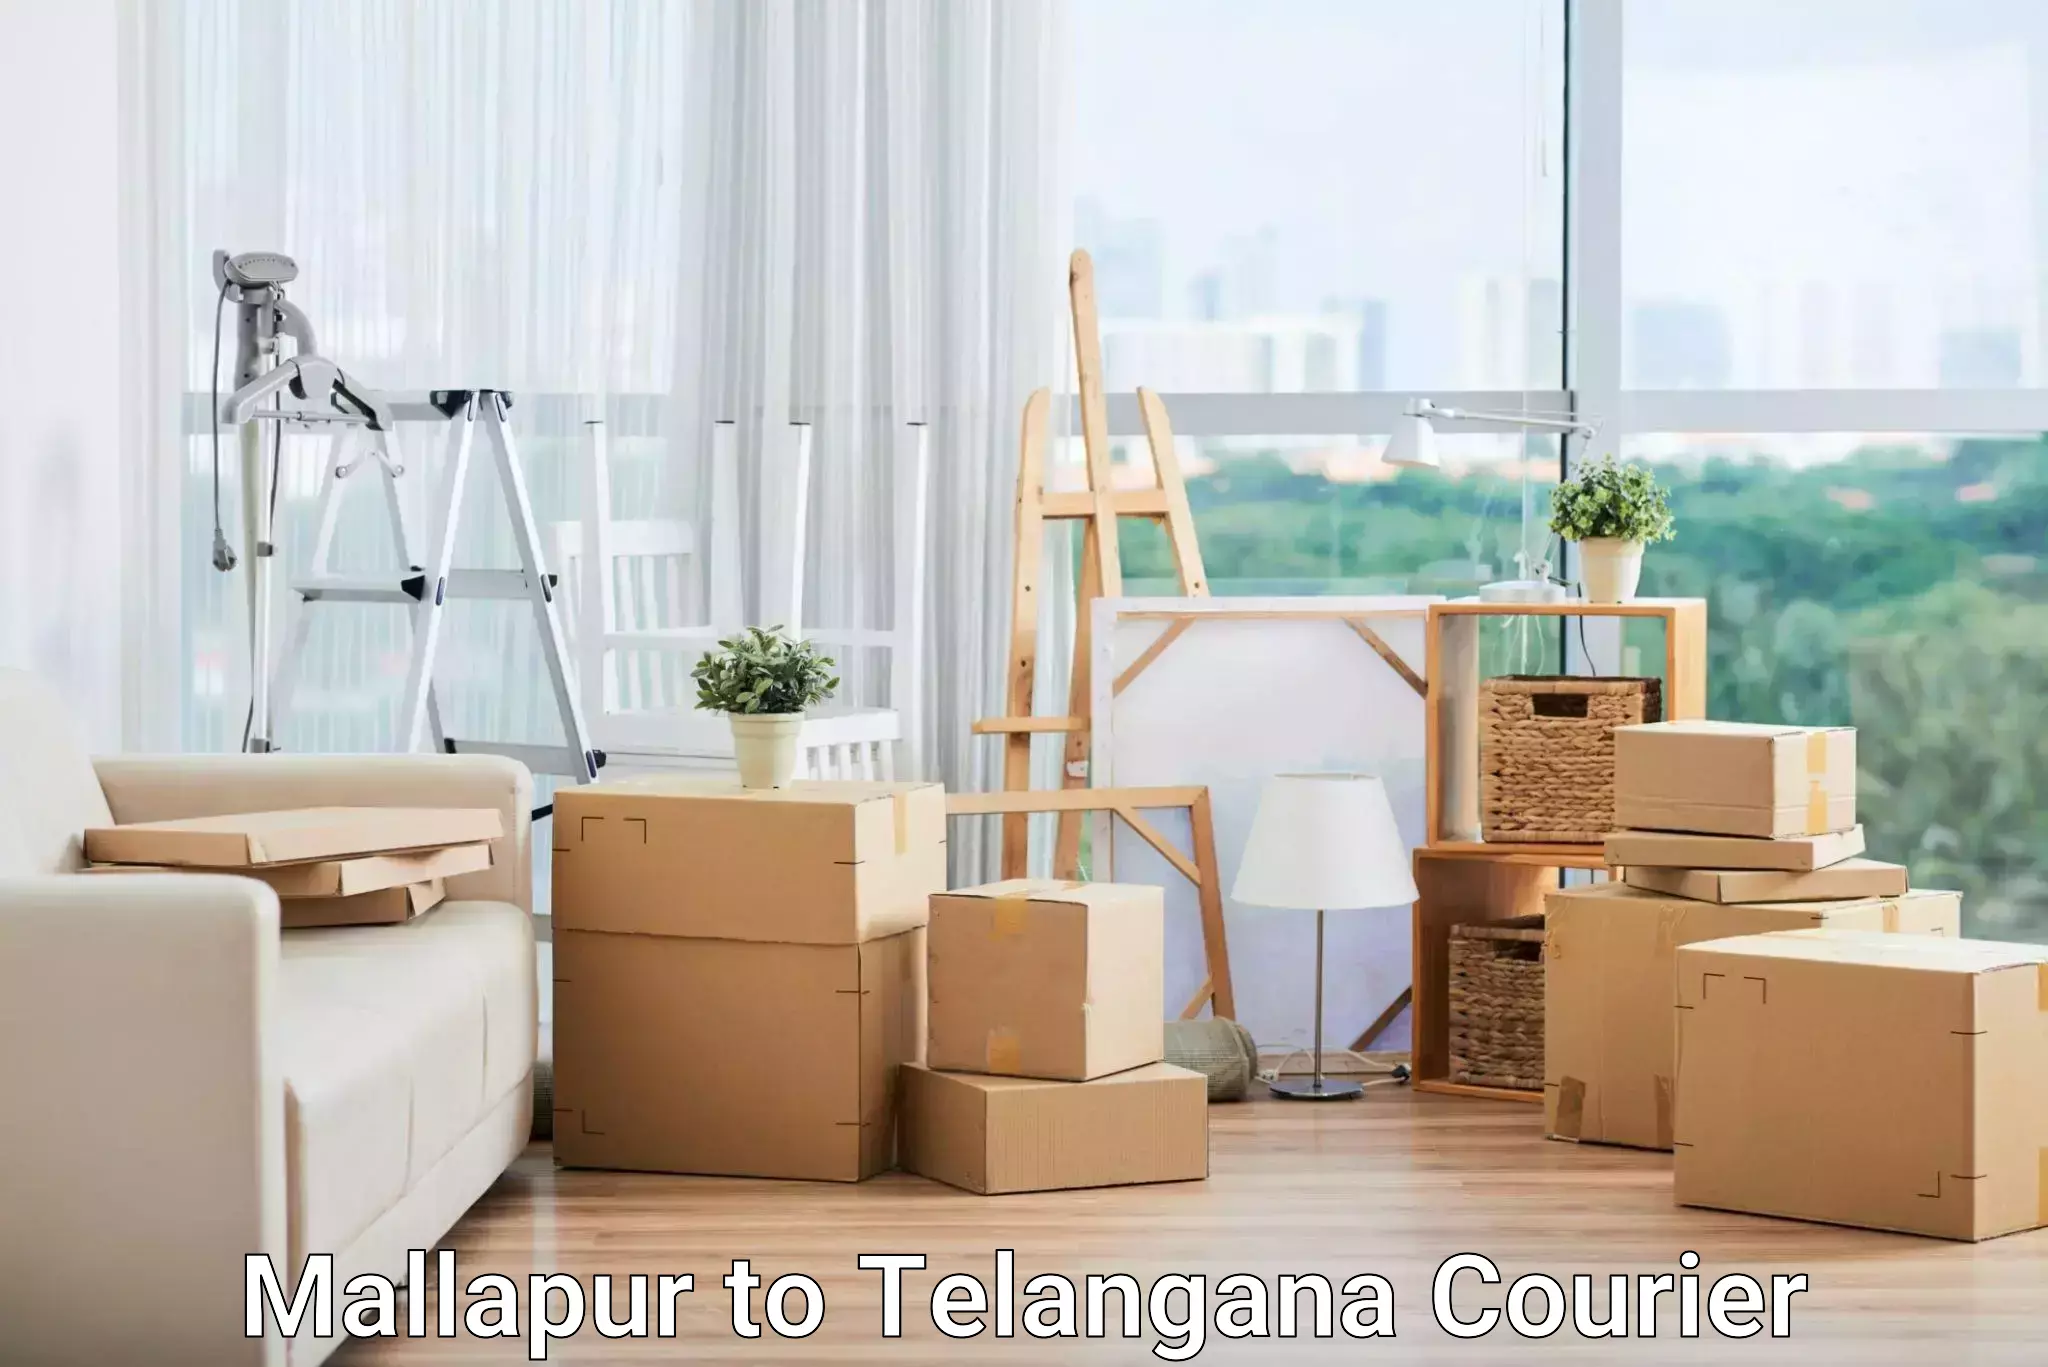 Parcel service for businesses in Mallapur to Odela